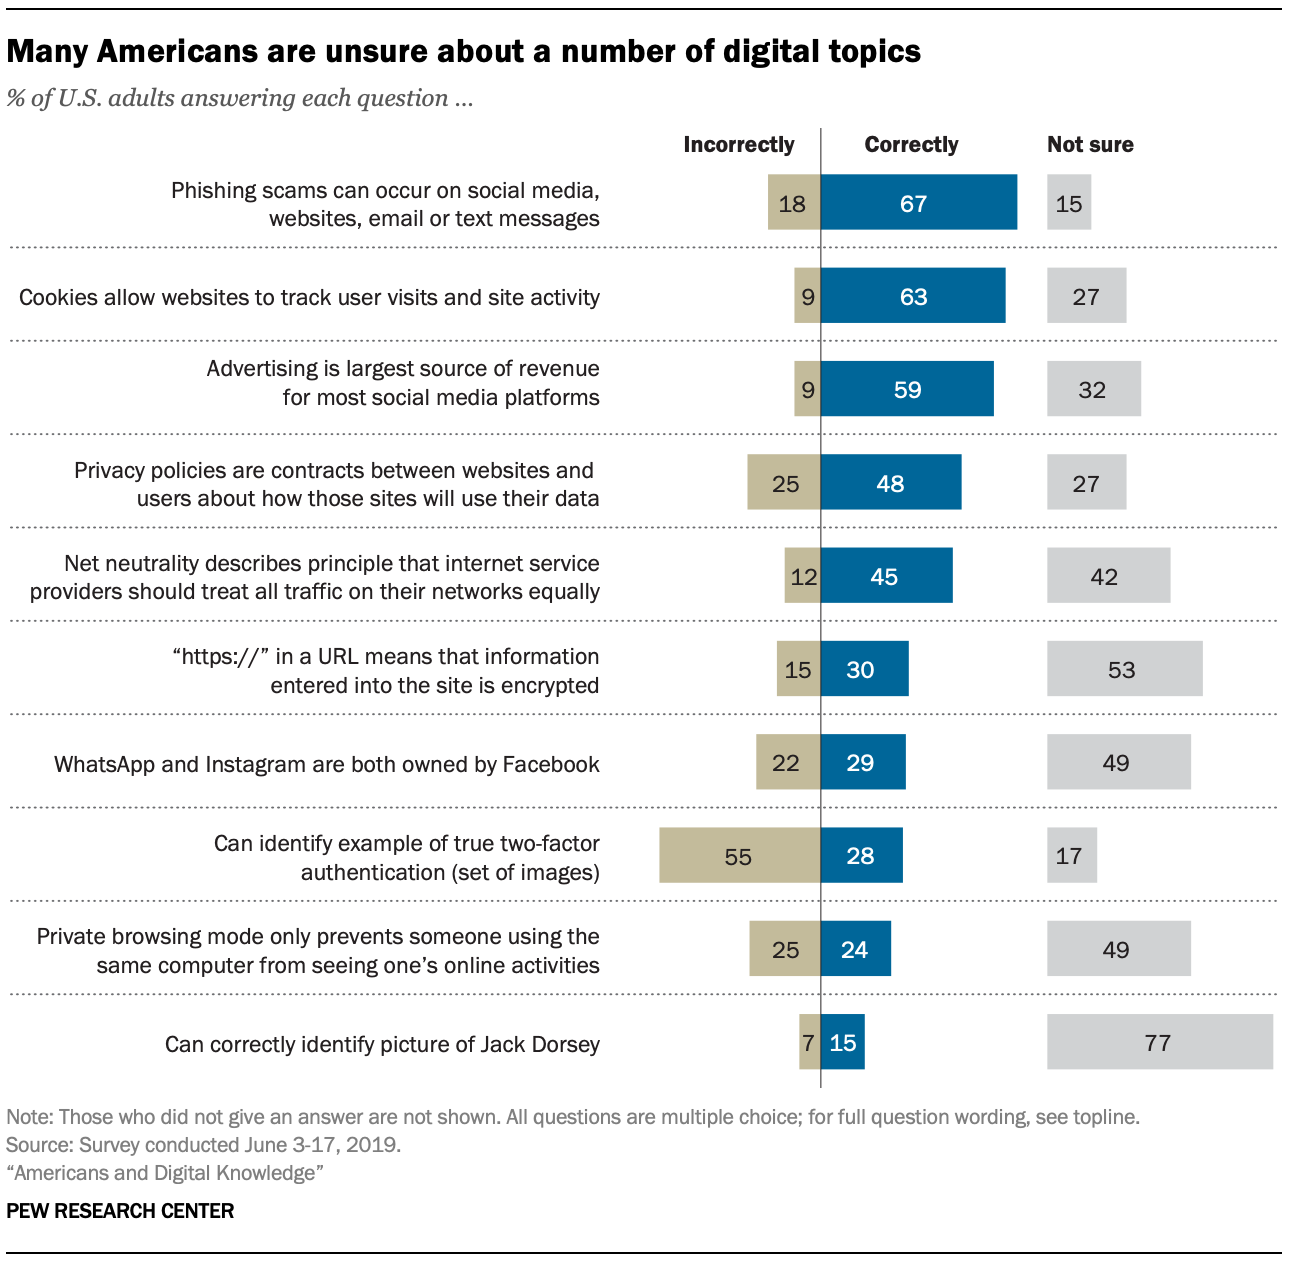 Many Americans are unsure about a number of digital topics